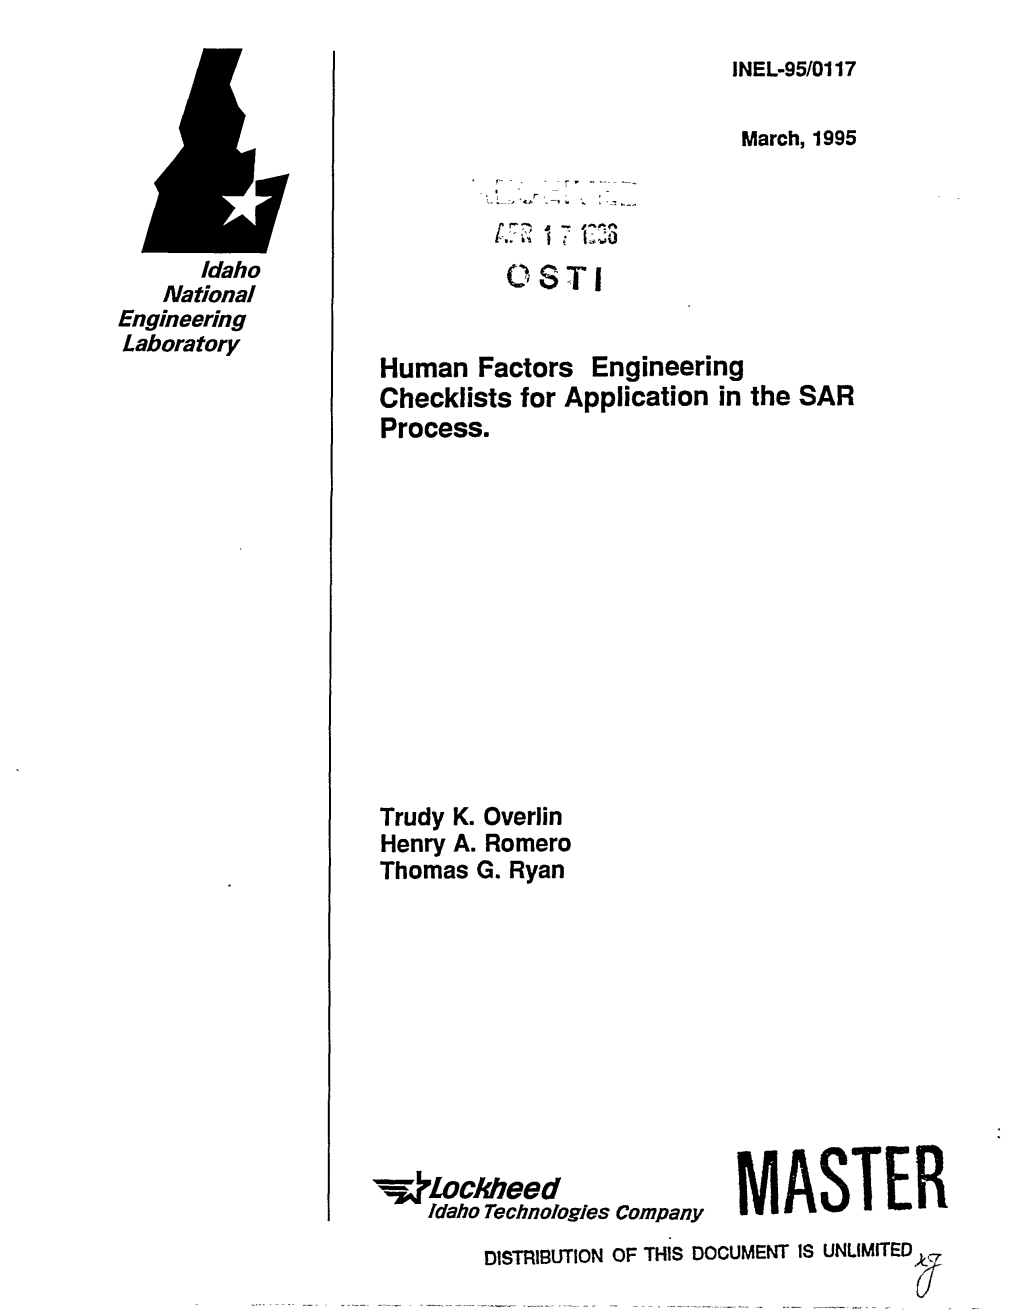 Human Factors Engineering Checklists for Application in the SAR Process